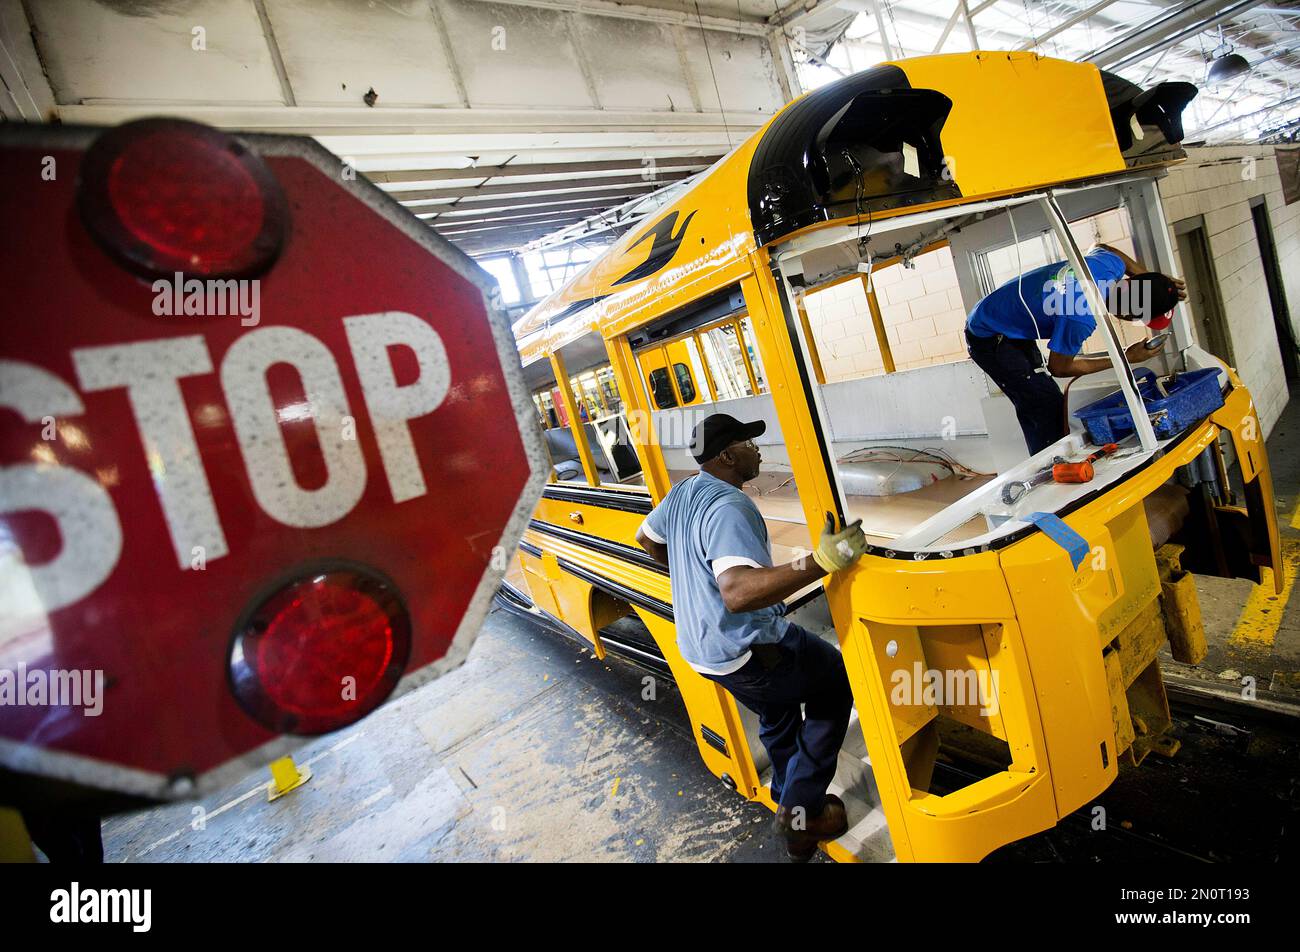 https://c8.alamy.com/comp/2N0T193/for-use-as-desired-in-this-sept-18-2015-photo-employees-work-on-a-school-bus-on-the-assembly-line-at-blue-bird-corporations-manufacturing-facility-in-fort-valley-ga-blue-bird-corporation-one-of-the-nations-leading-manufacturer-of-school-buses-employees-about-1600-workers-and-has-sold-more-than-550000-buses-since-its-formation-in-1927-ap-photodavid-goldman-2N0T193.jpg